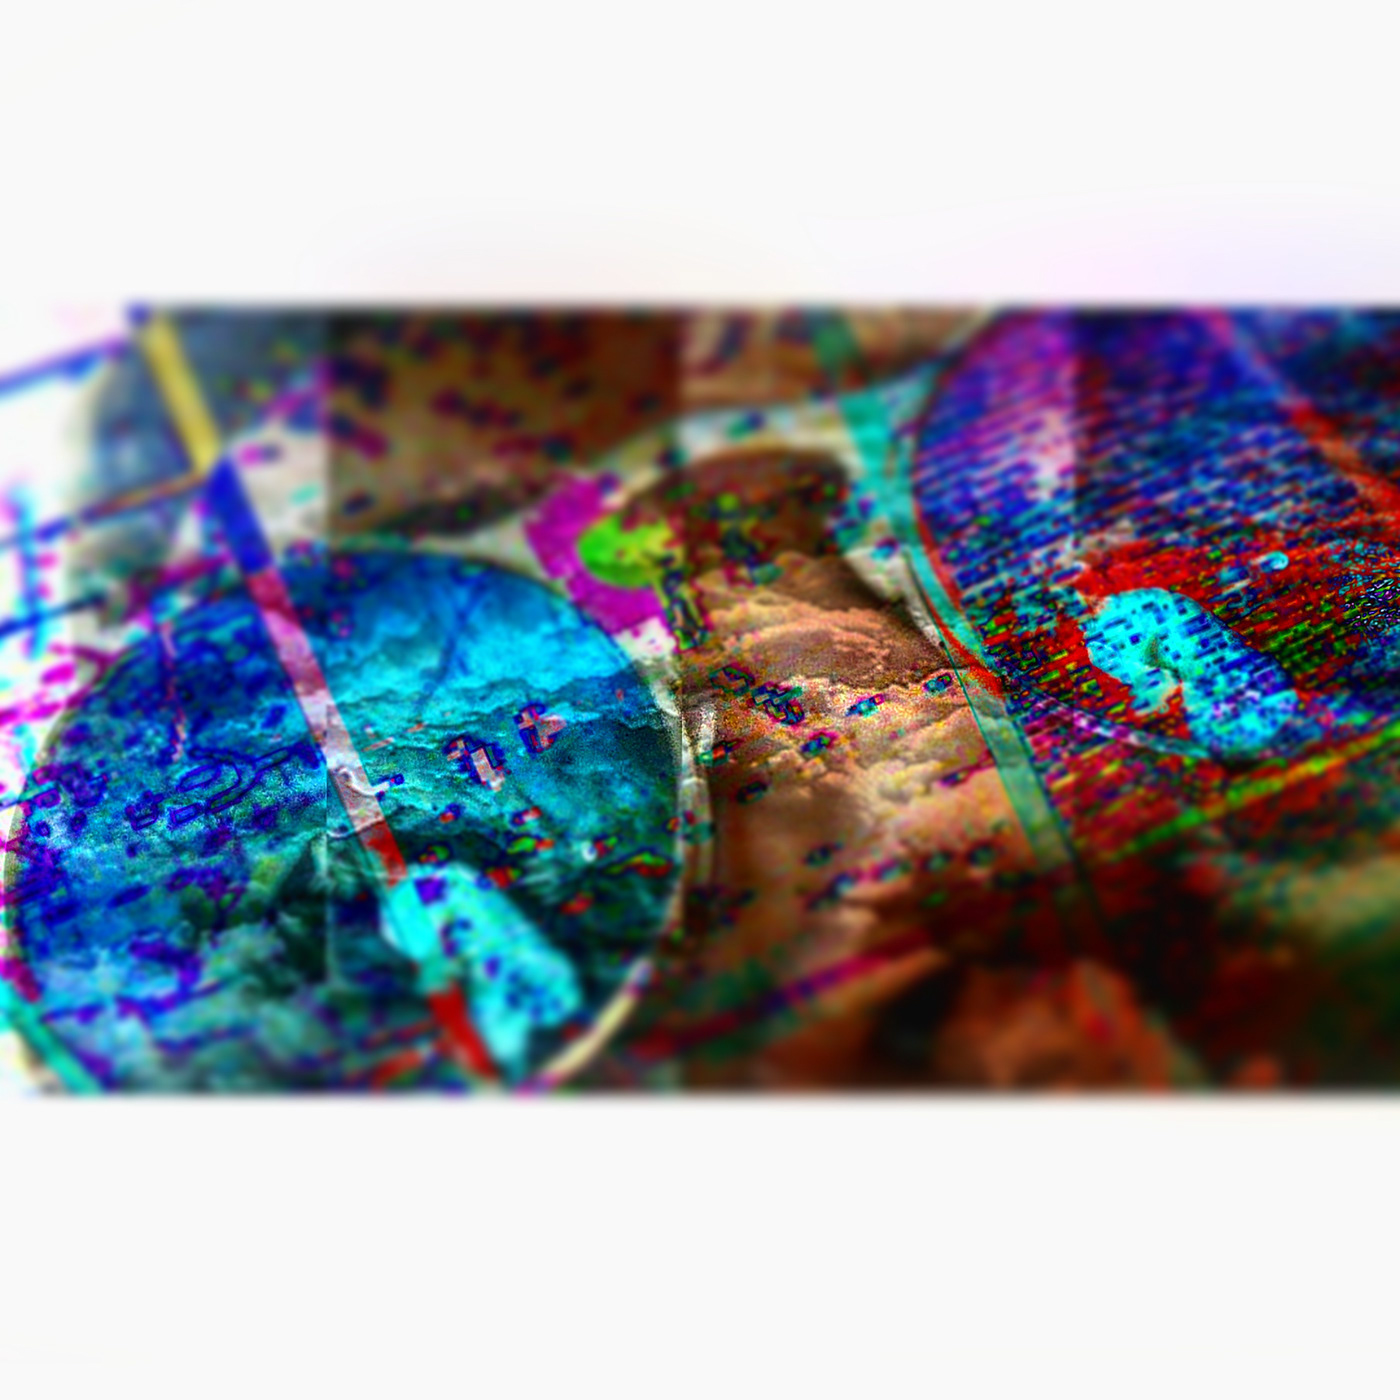 Trippy double exposure colored composition of a picture of a visage with sunglasses and a bedsheet
